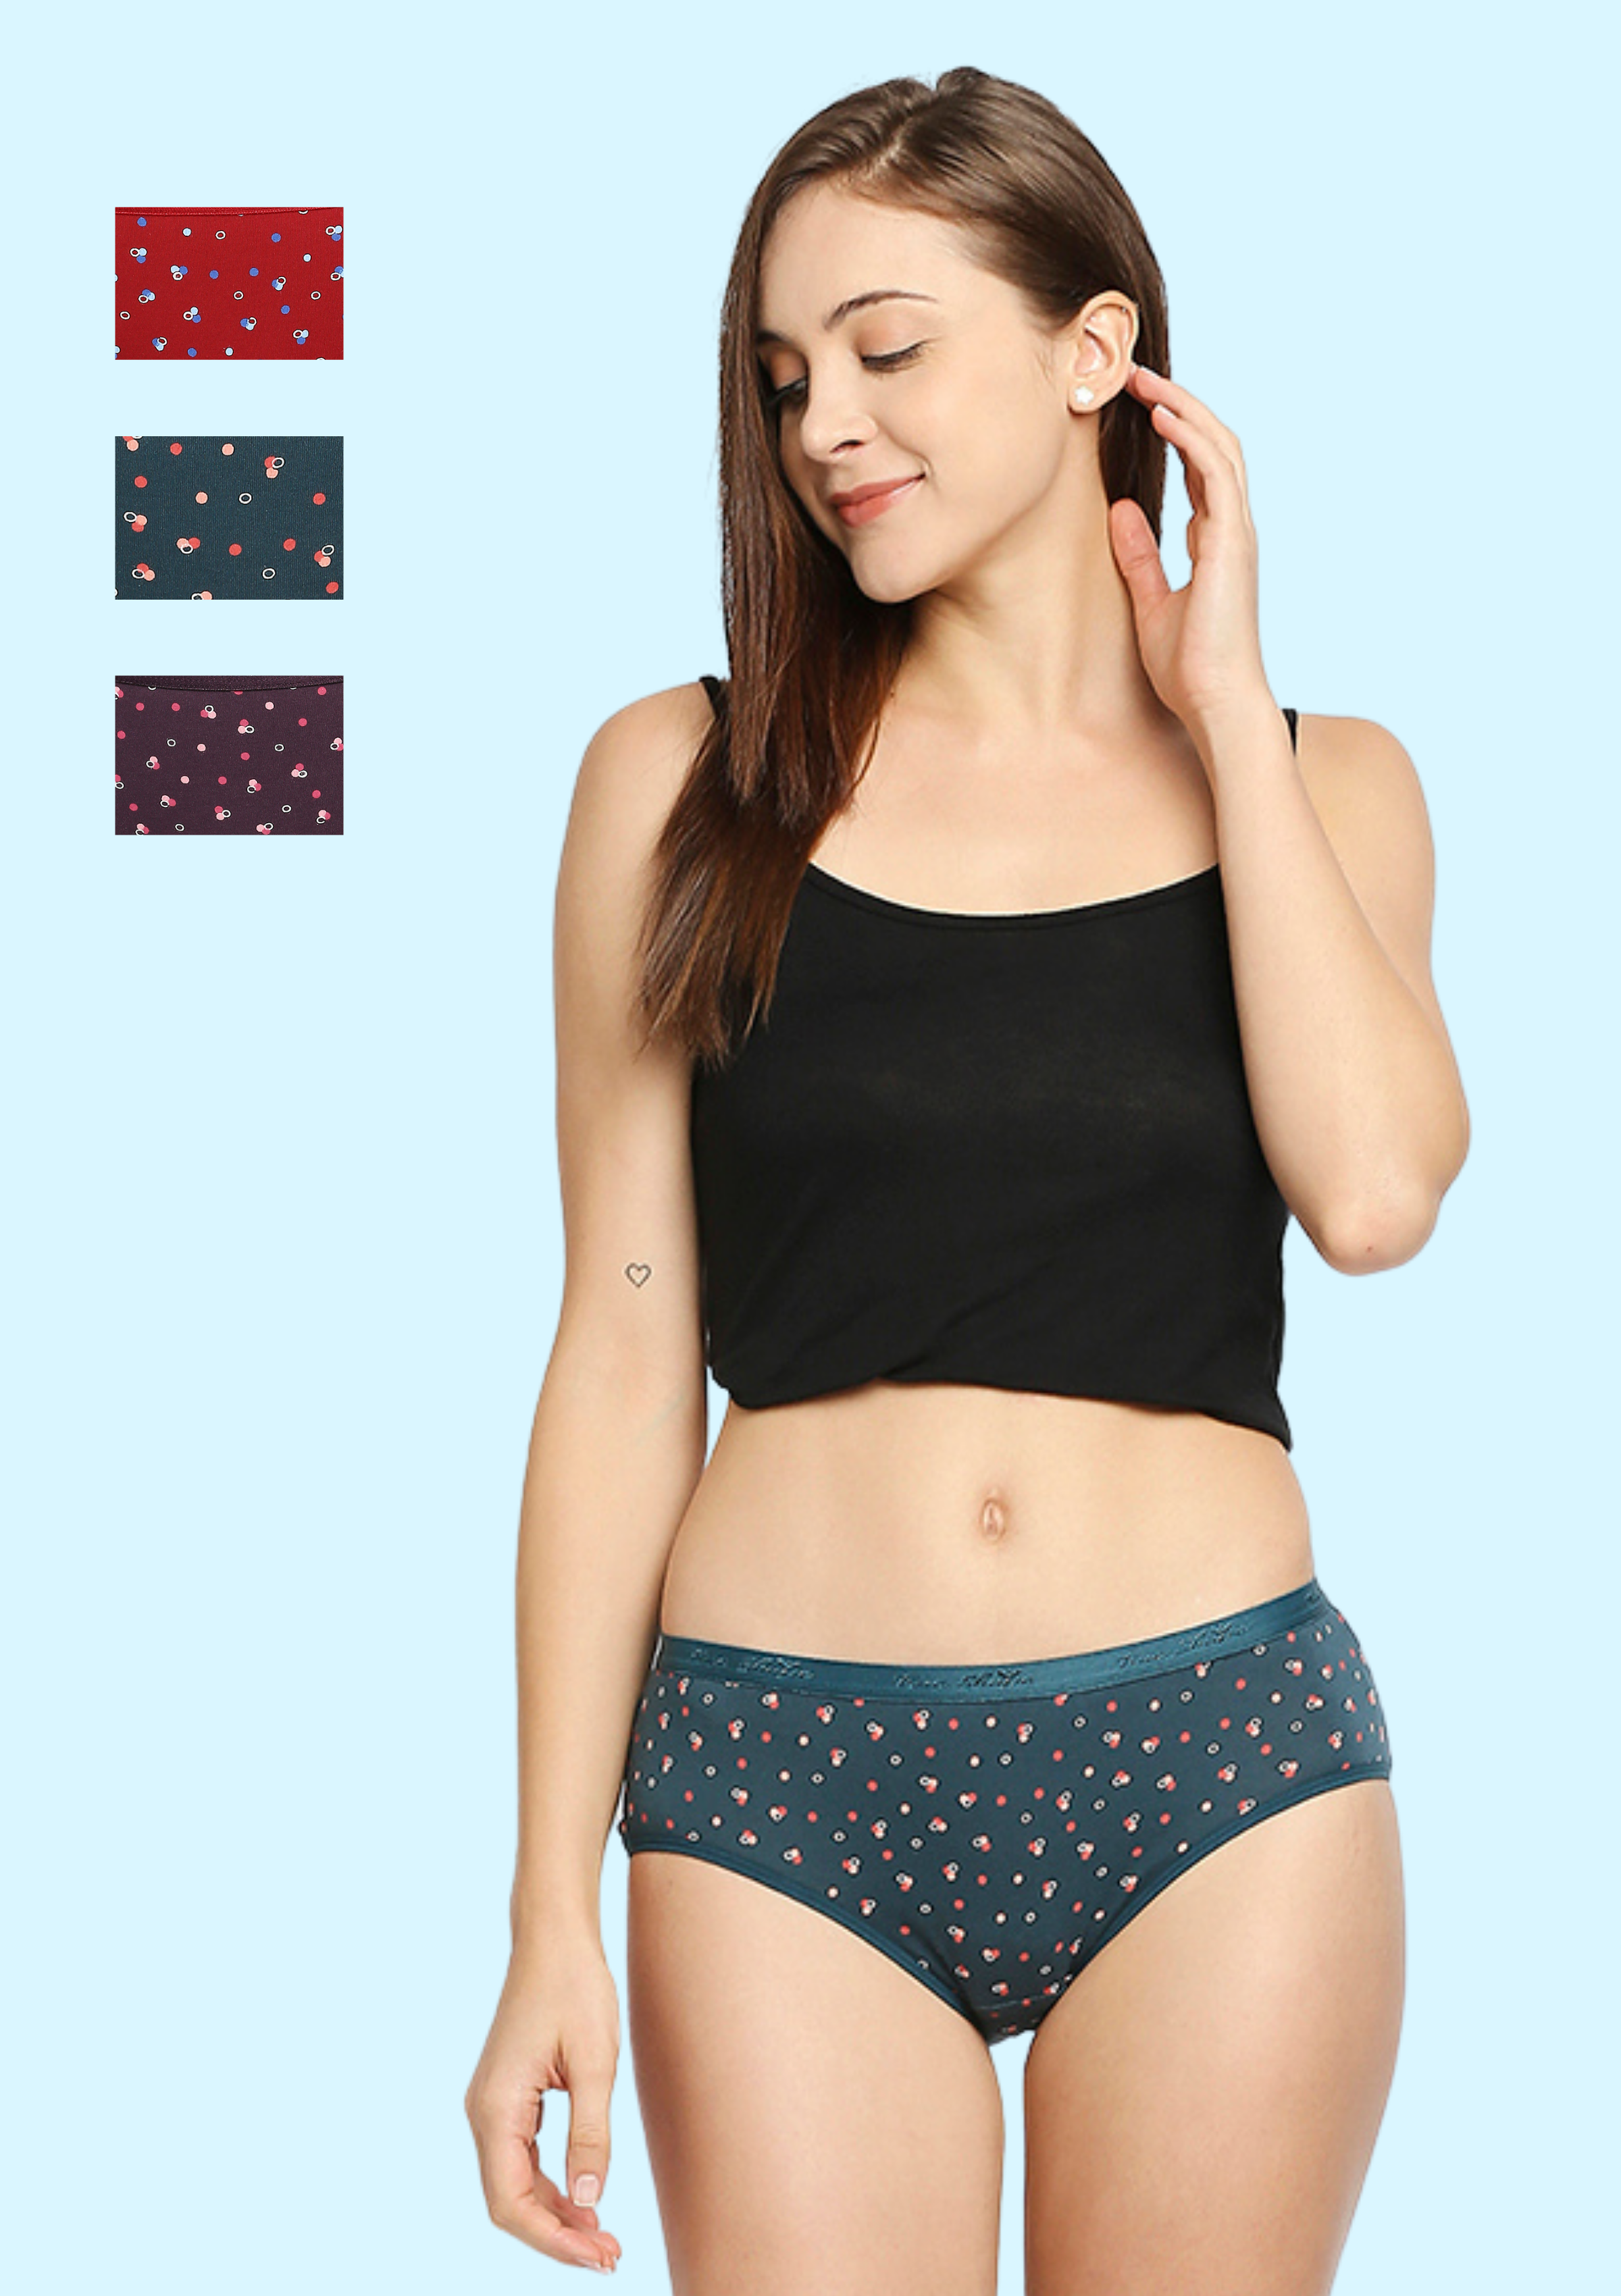 Plus Size Shaping Underwear at Rs 2999.00, Seamless Underwear